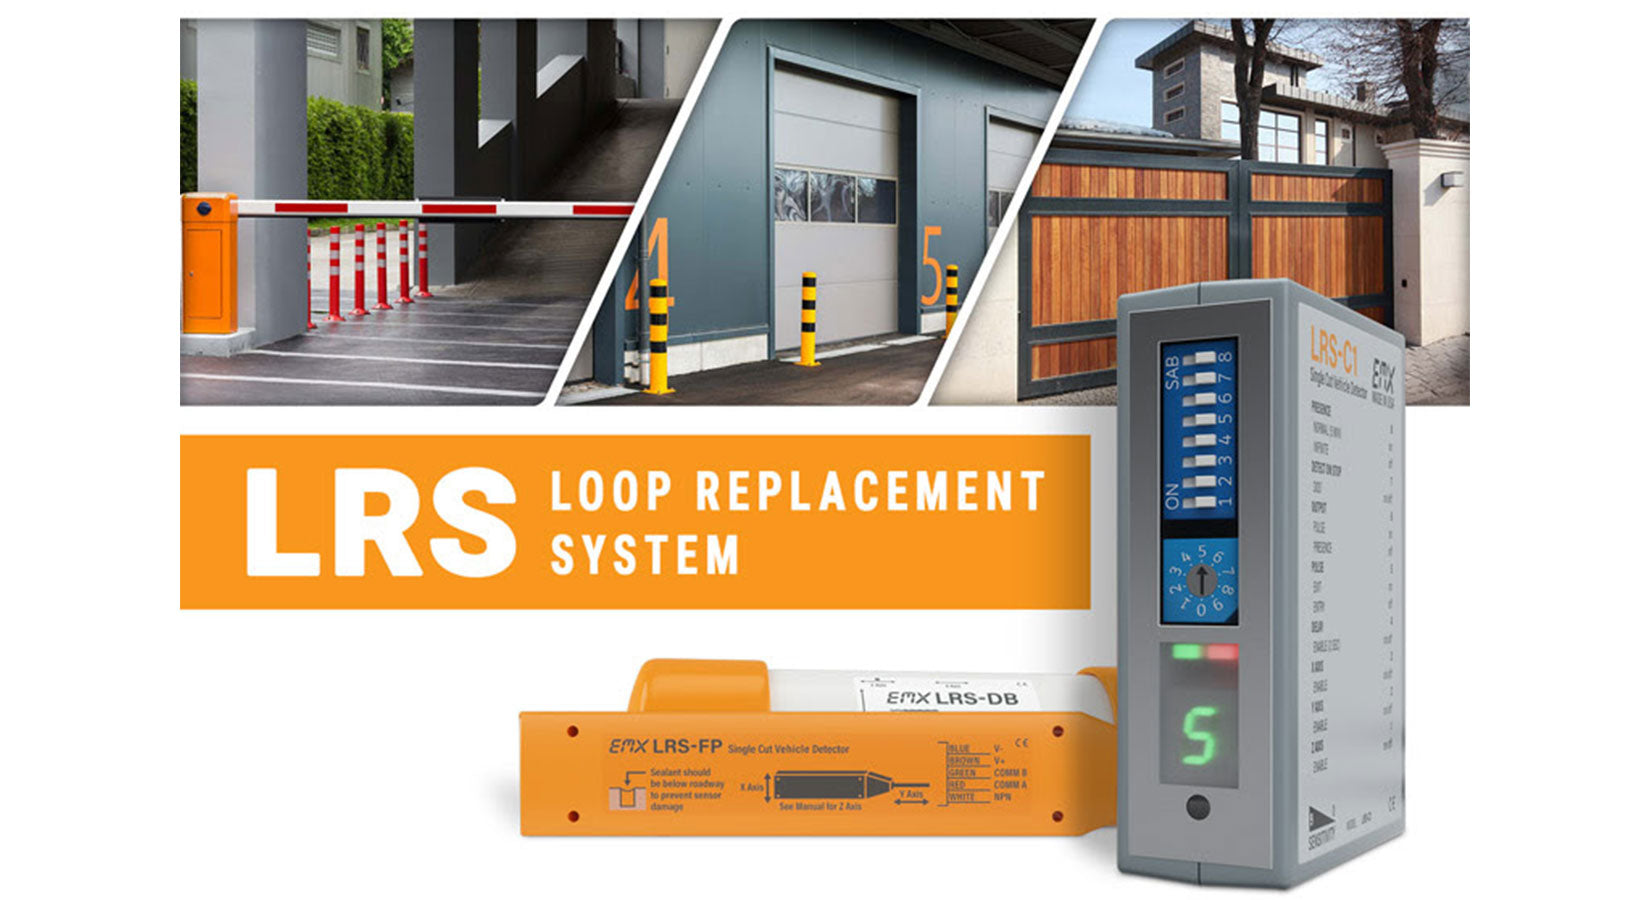 EMX New Virtual Loop Replacement System | All Security Equipment